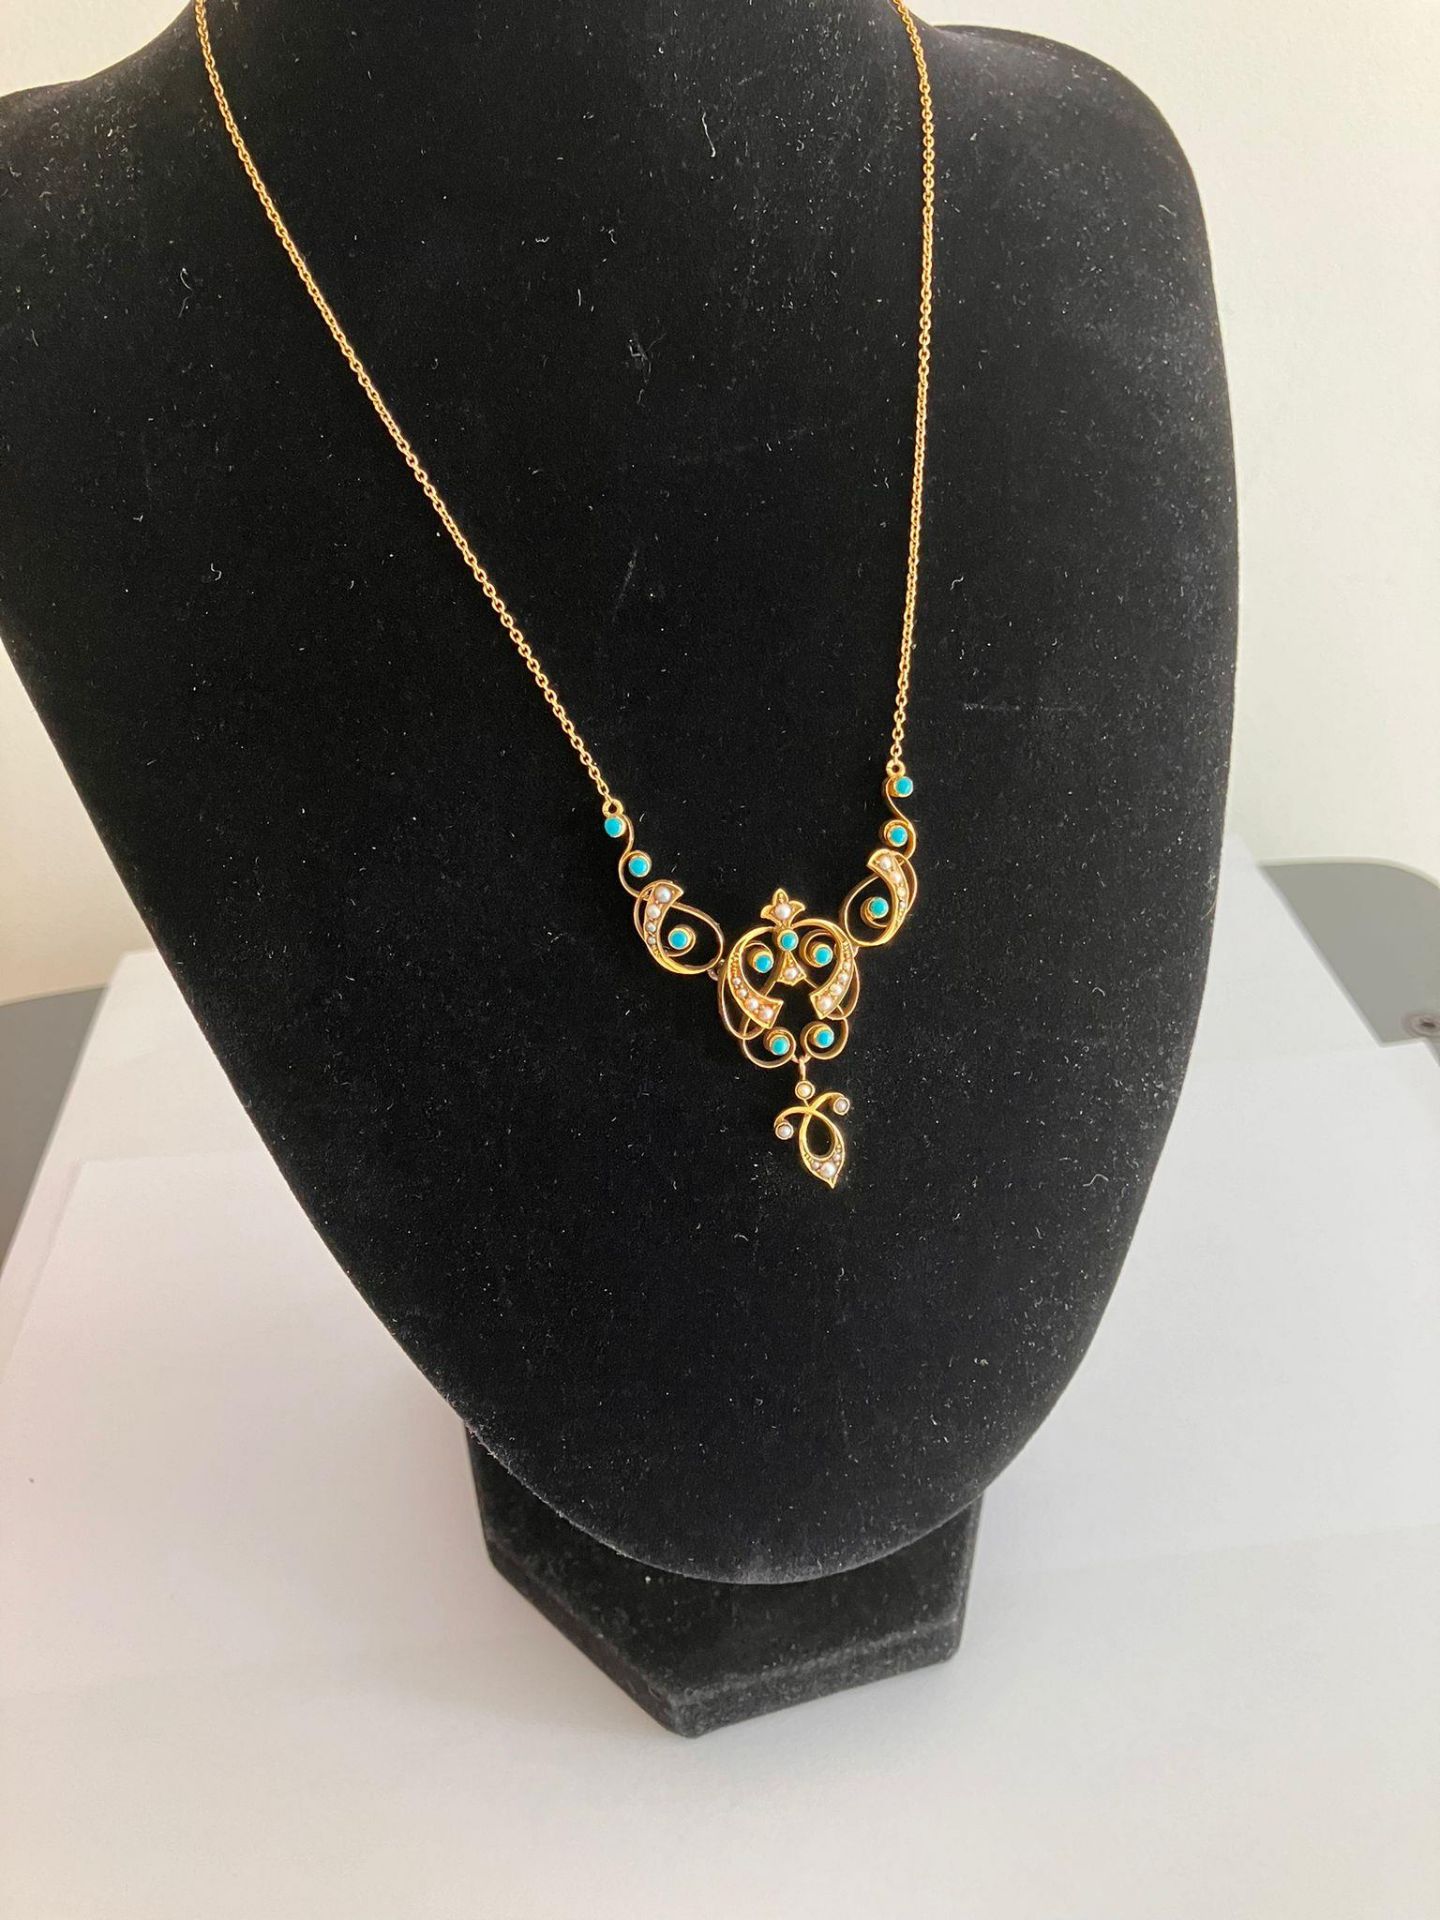 Magnificent Antique Edwardian 15 carat GOLD PENDANT NECKLACE Set with Seed Pearls and Turquoise. - Bild 4 aus 4